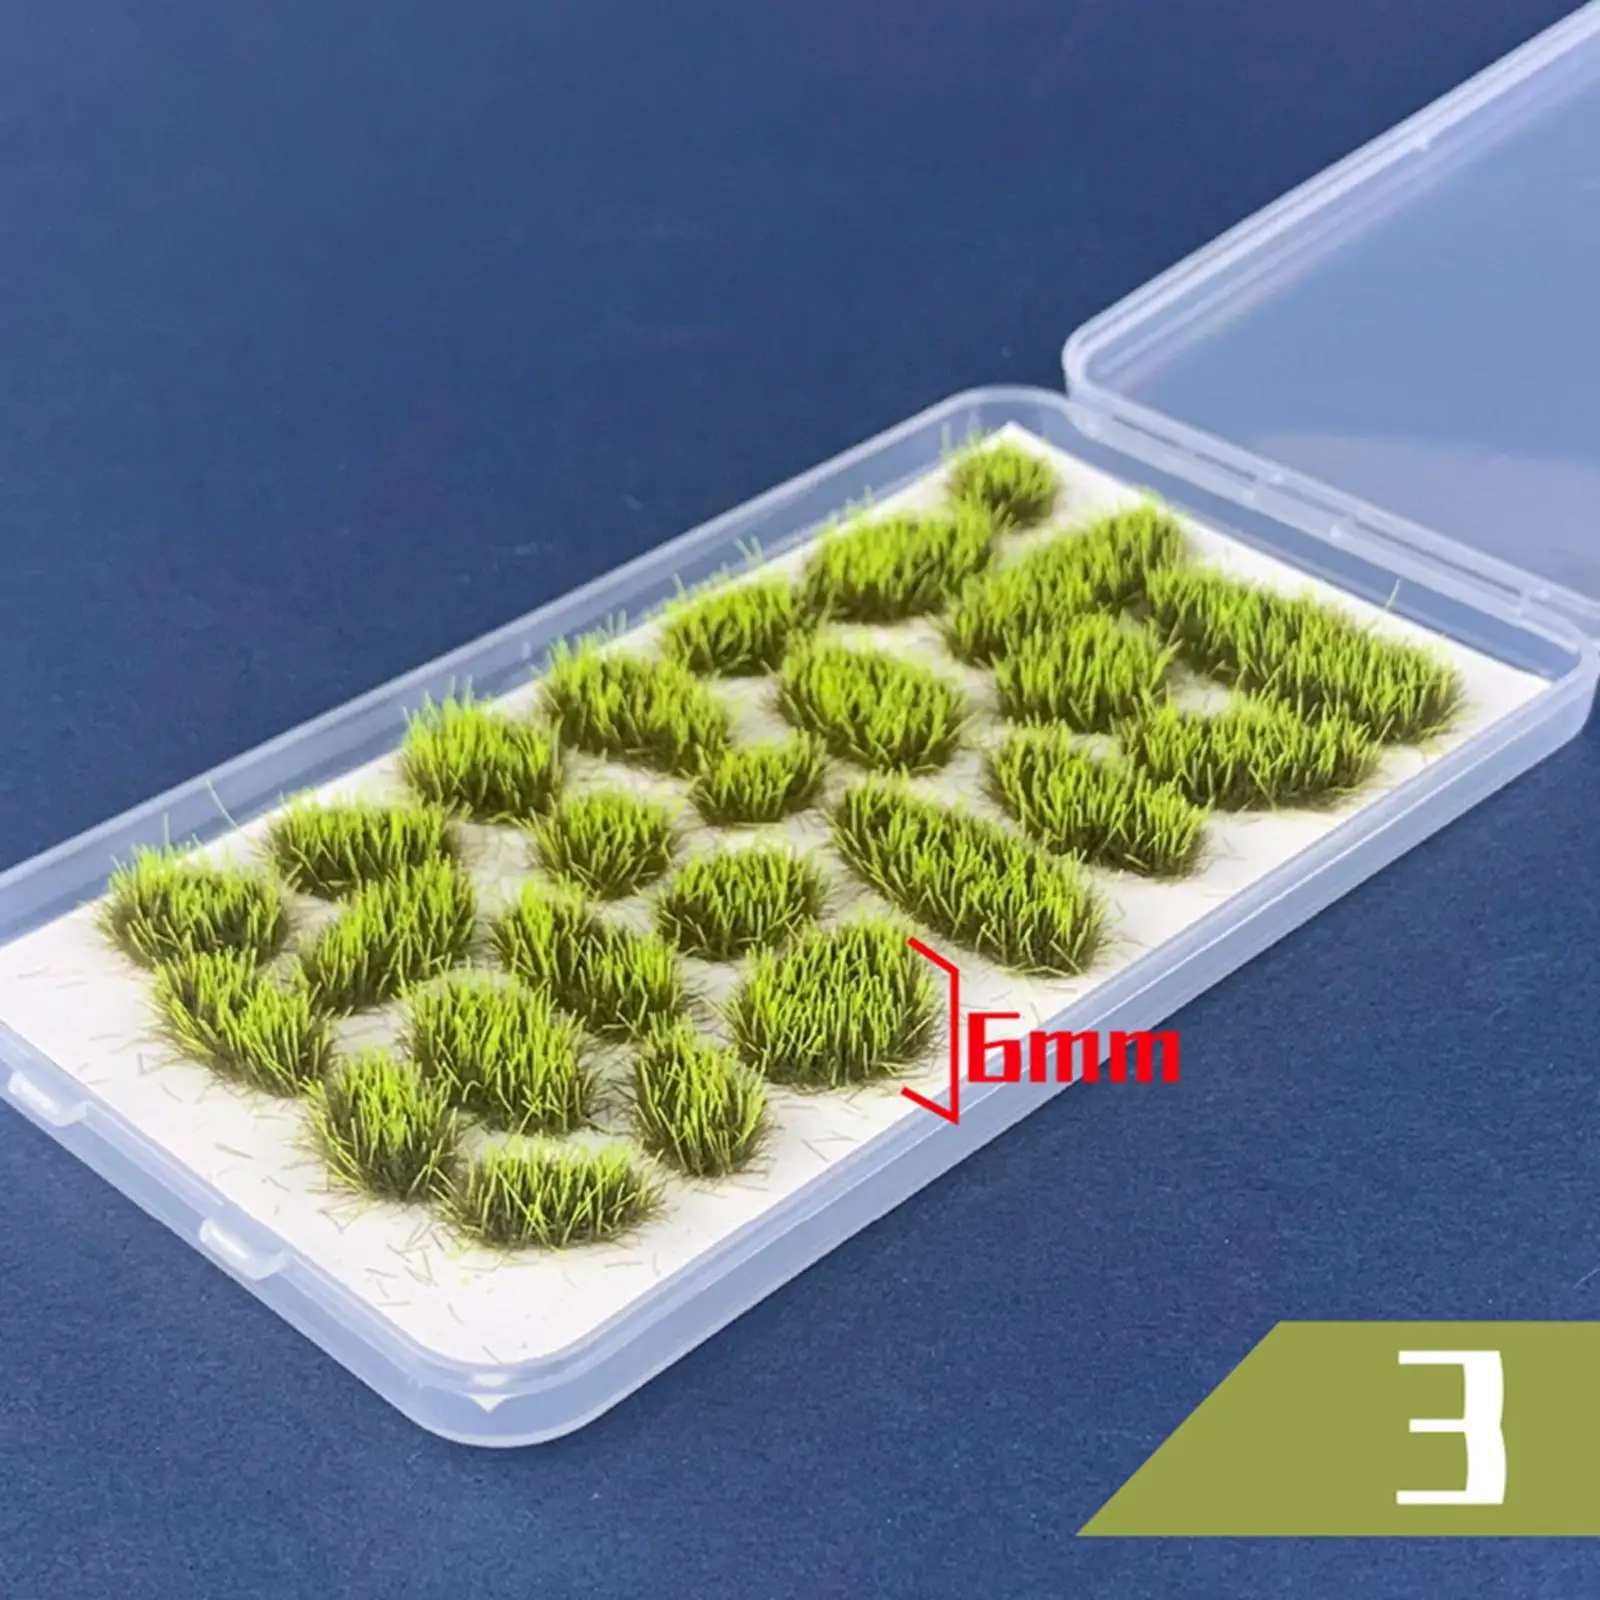 25x Cluster Grass Dioramas Scenery Decor Cluster Model for Garden Scenery Landscape Dioramas Scenery DIY Landscape Layout